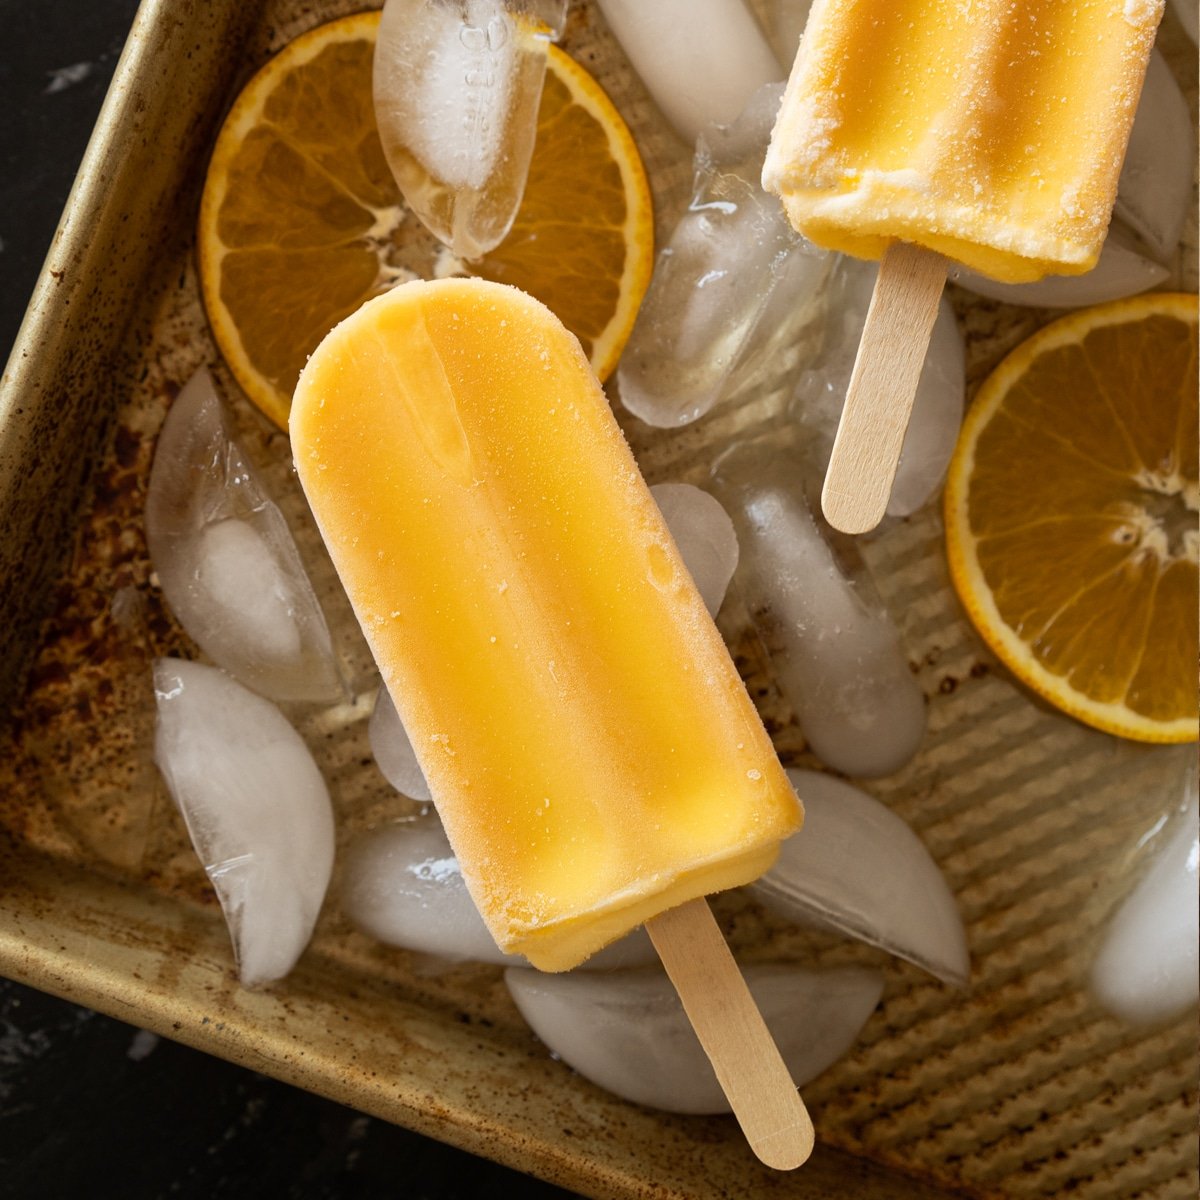 Keto orange creamsicle popsicles on a baking tray with ice